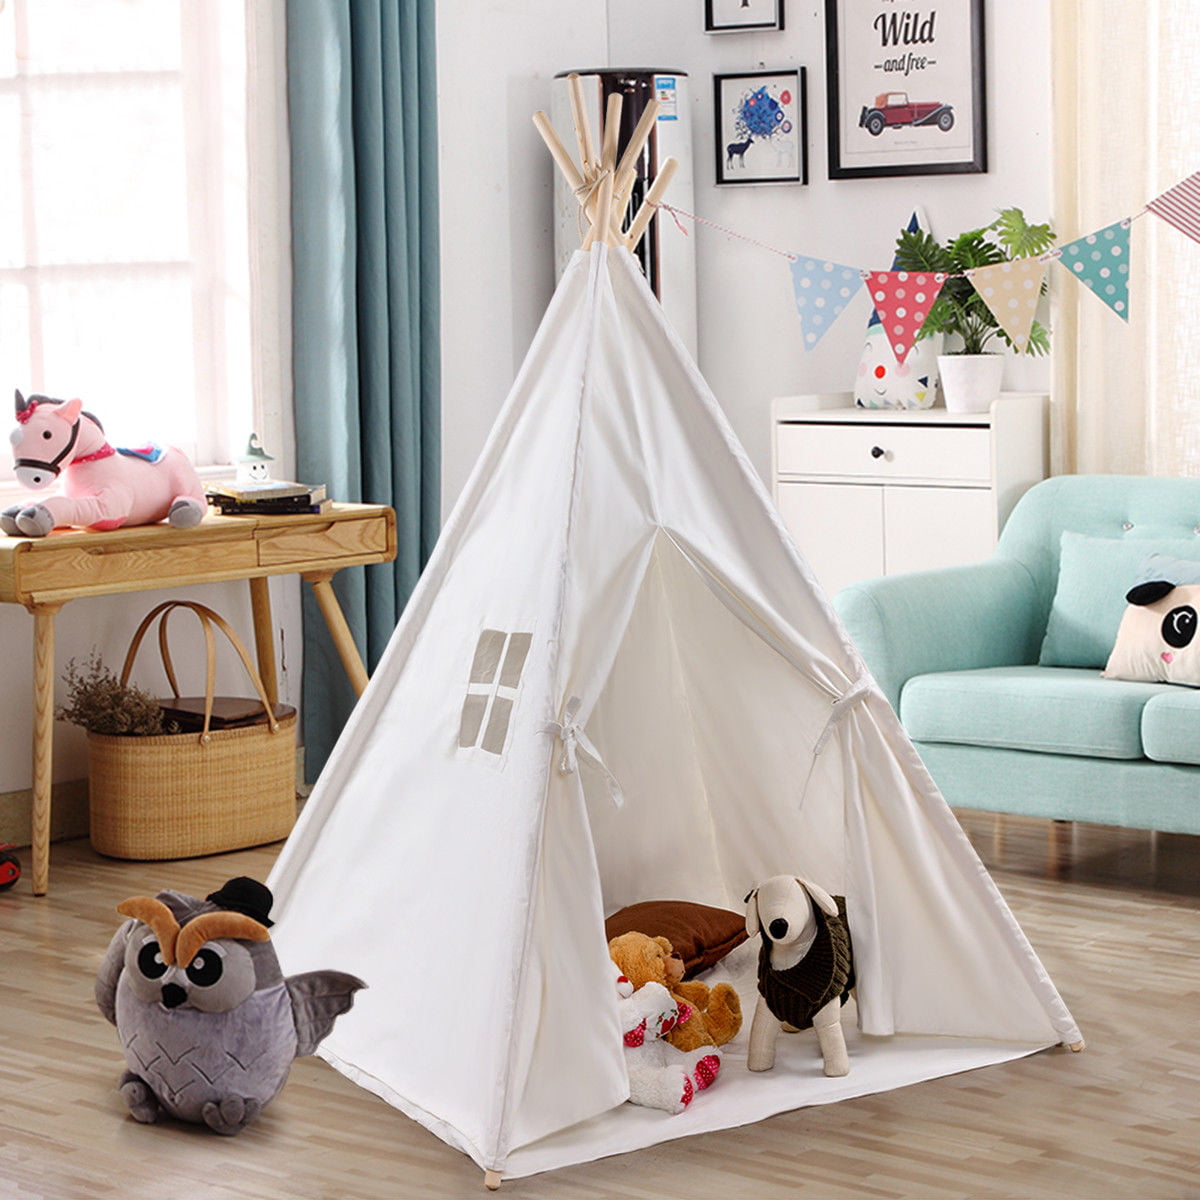 Kids Indoor Outdoor White Indian Tent Teepee Play Play House Dome Portable Bag 